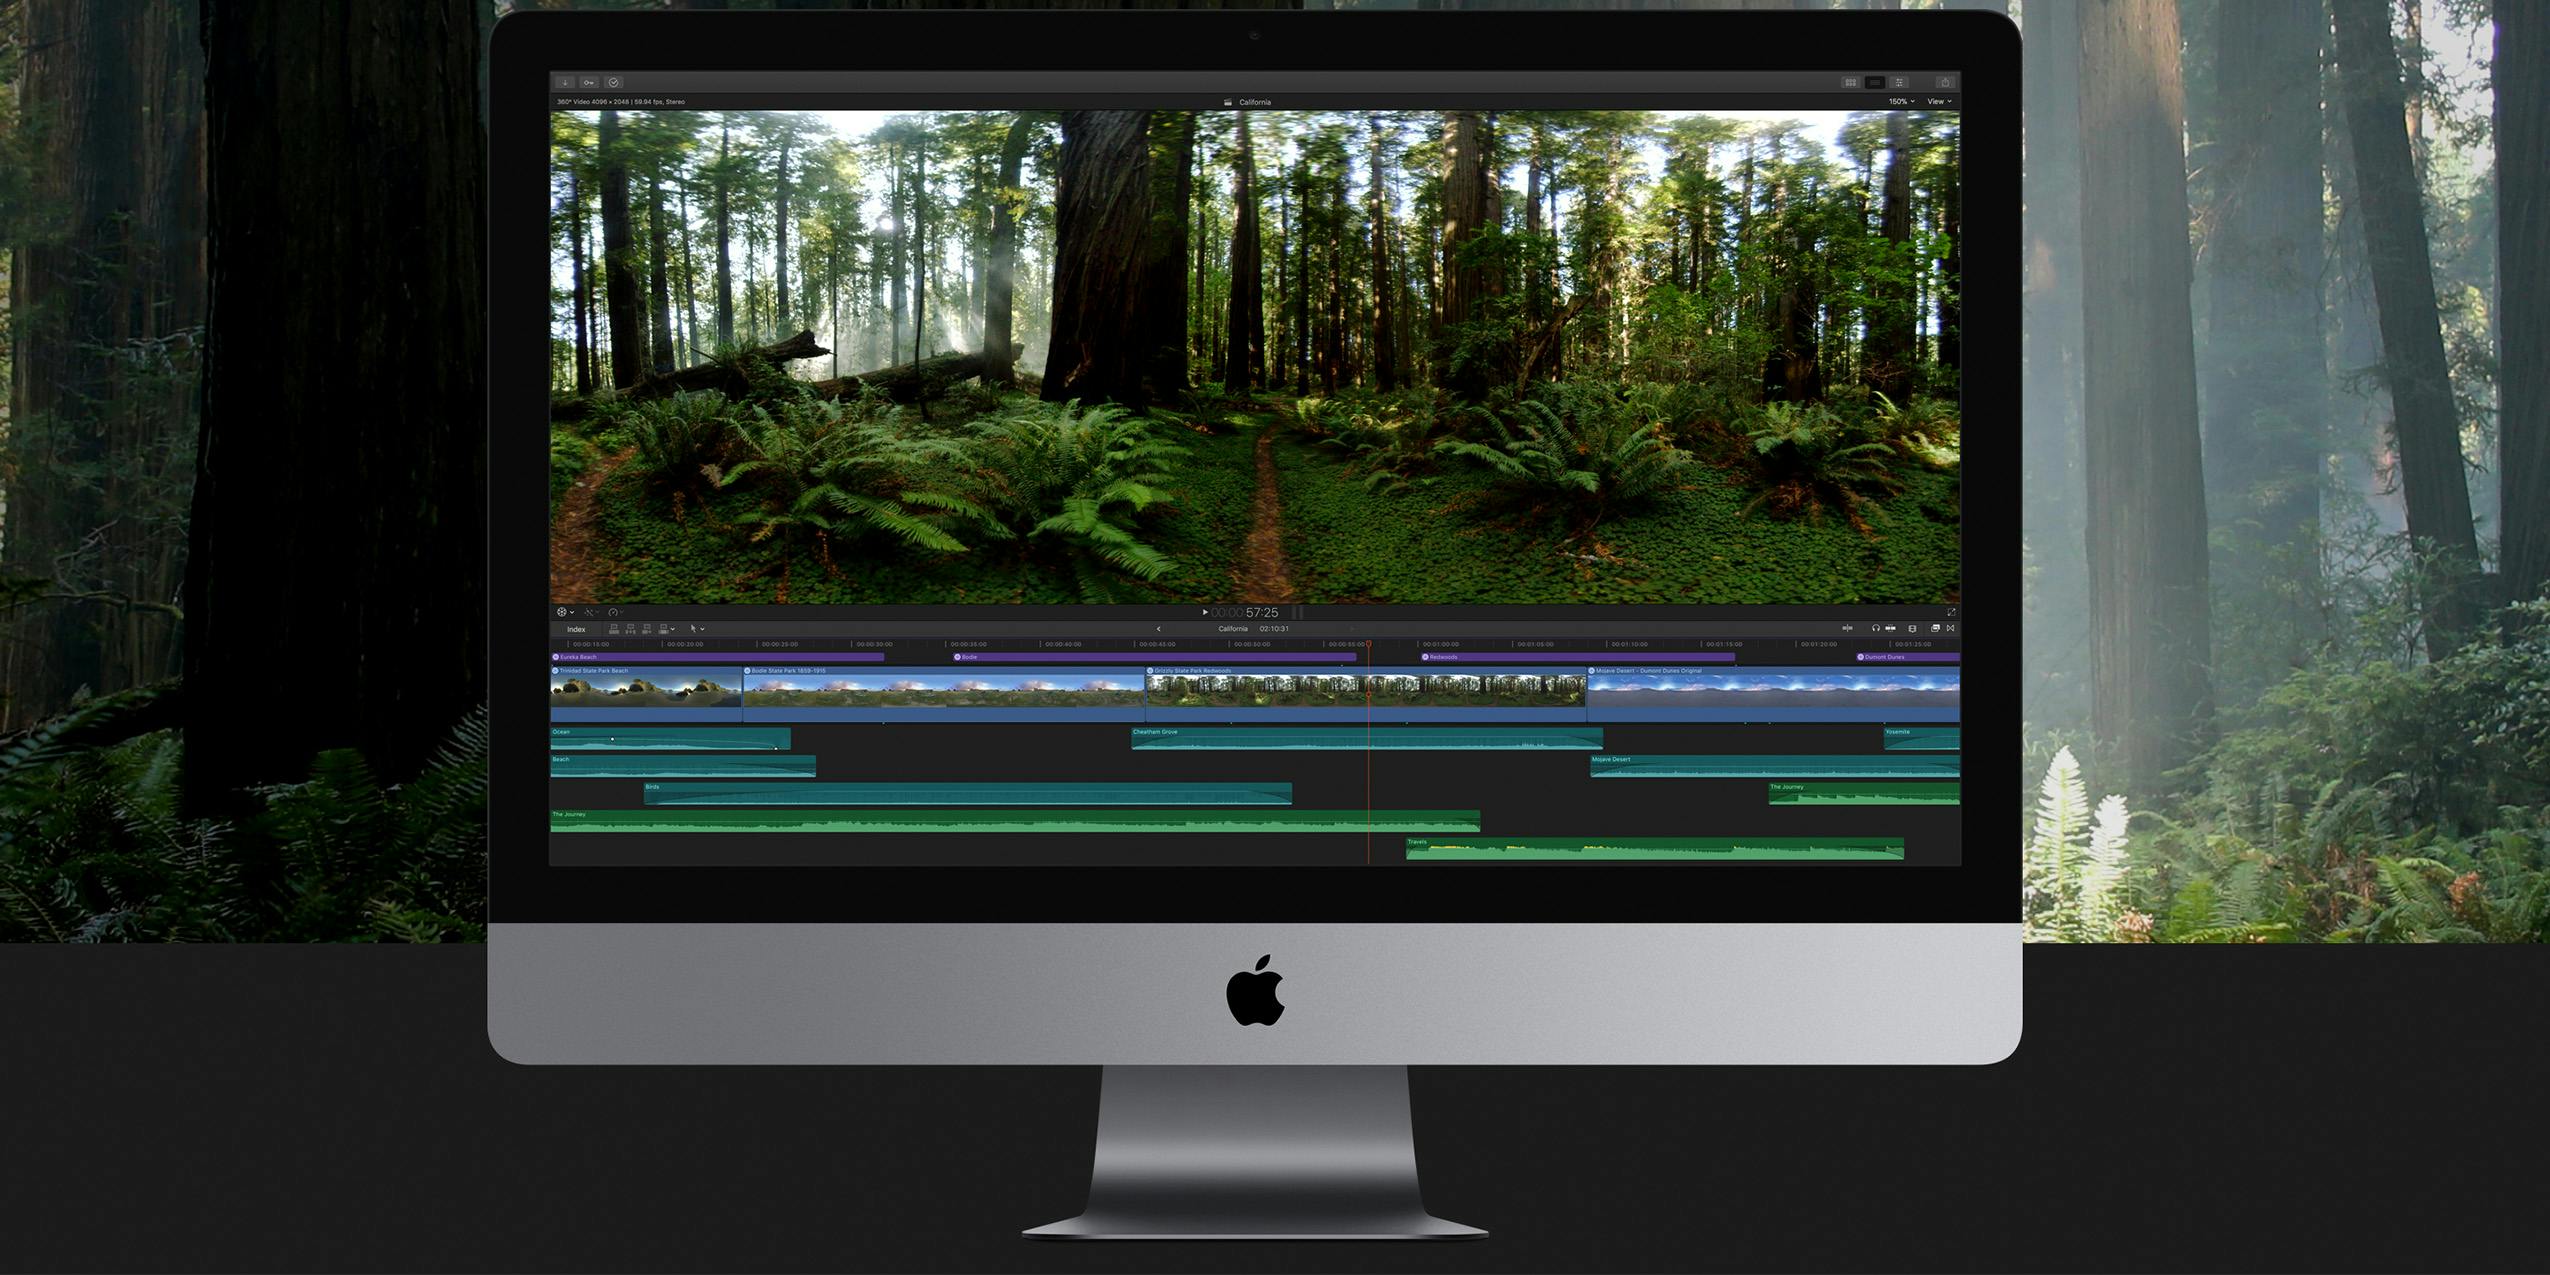 Final Cut Pro being used to edit nature videos and audio by content creators.